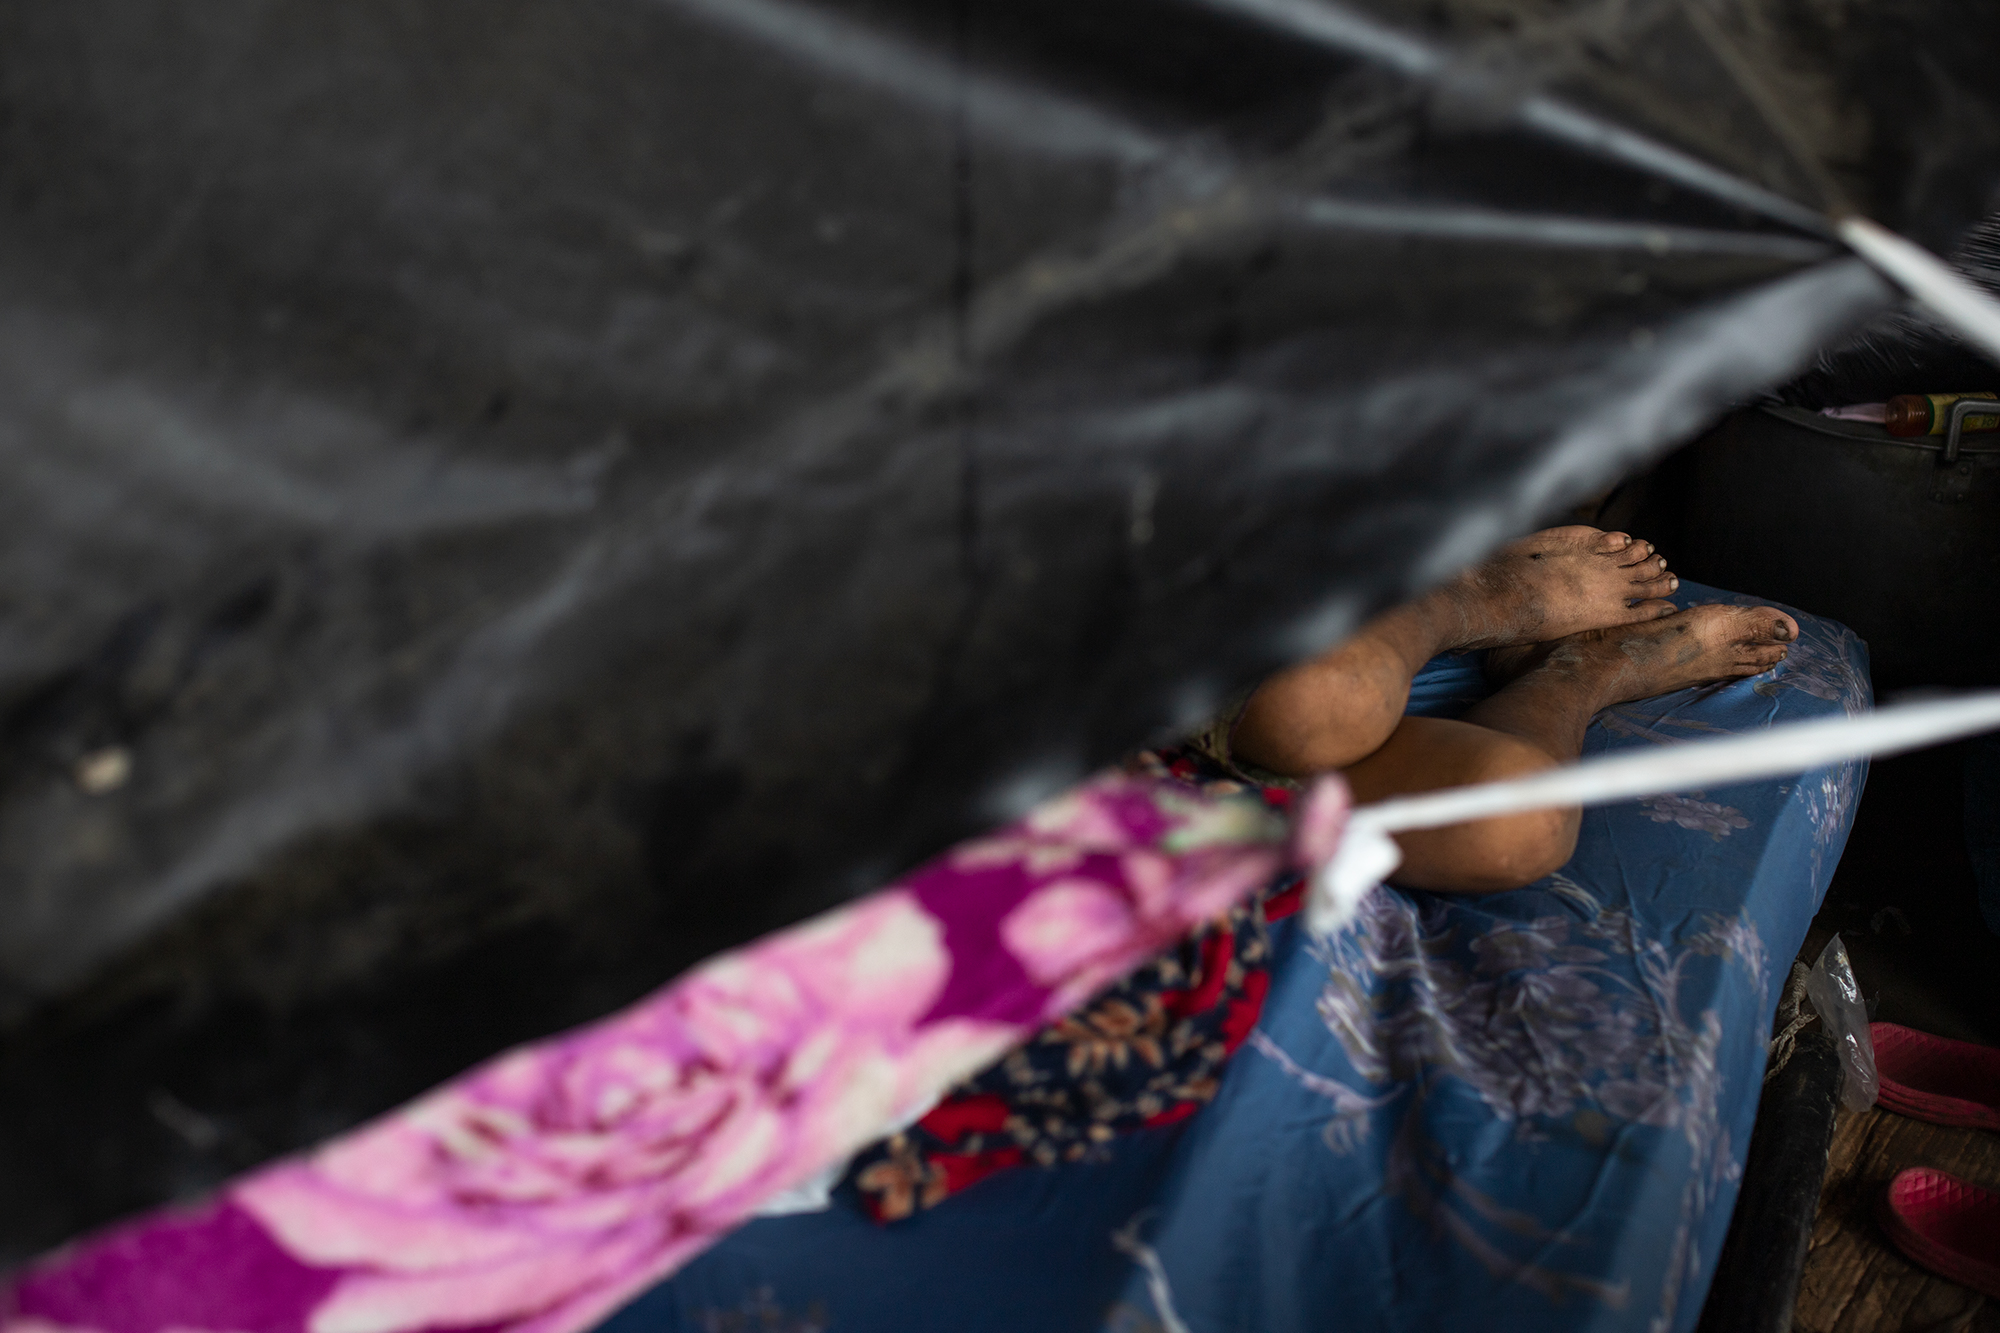 An old woman rests on a mattress inside a refuge constructed with plastic and pieces of wood underneath a bridge facing Chamelecón. San Pedro Sula, Nov. 21, 2020.